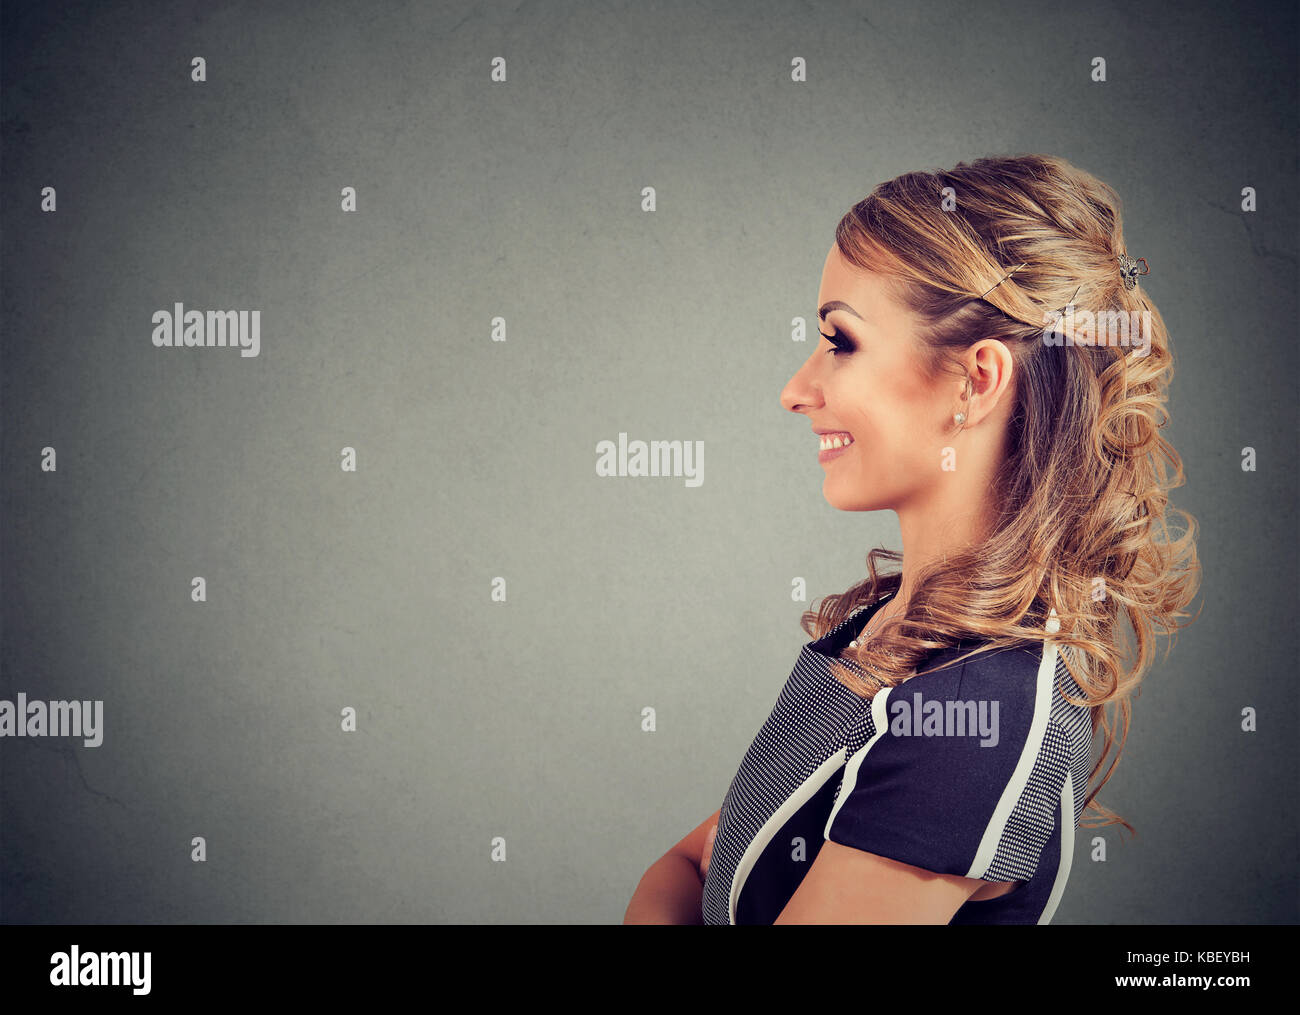 Side profile of a beautiful young woman Stock Photo